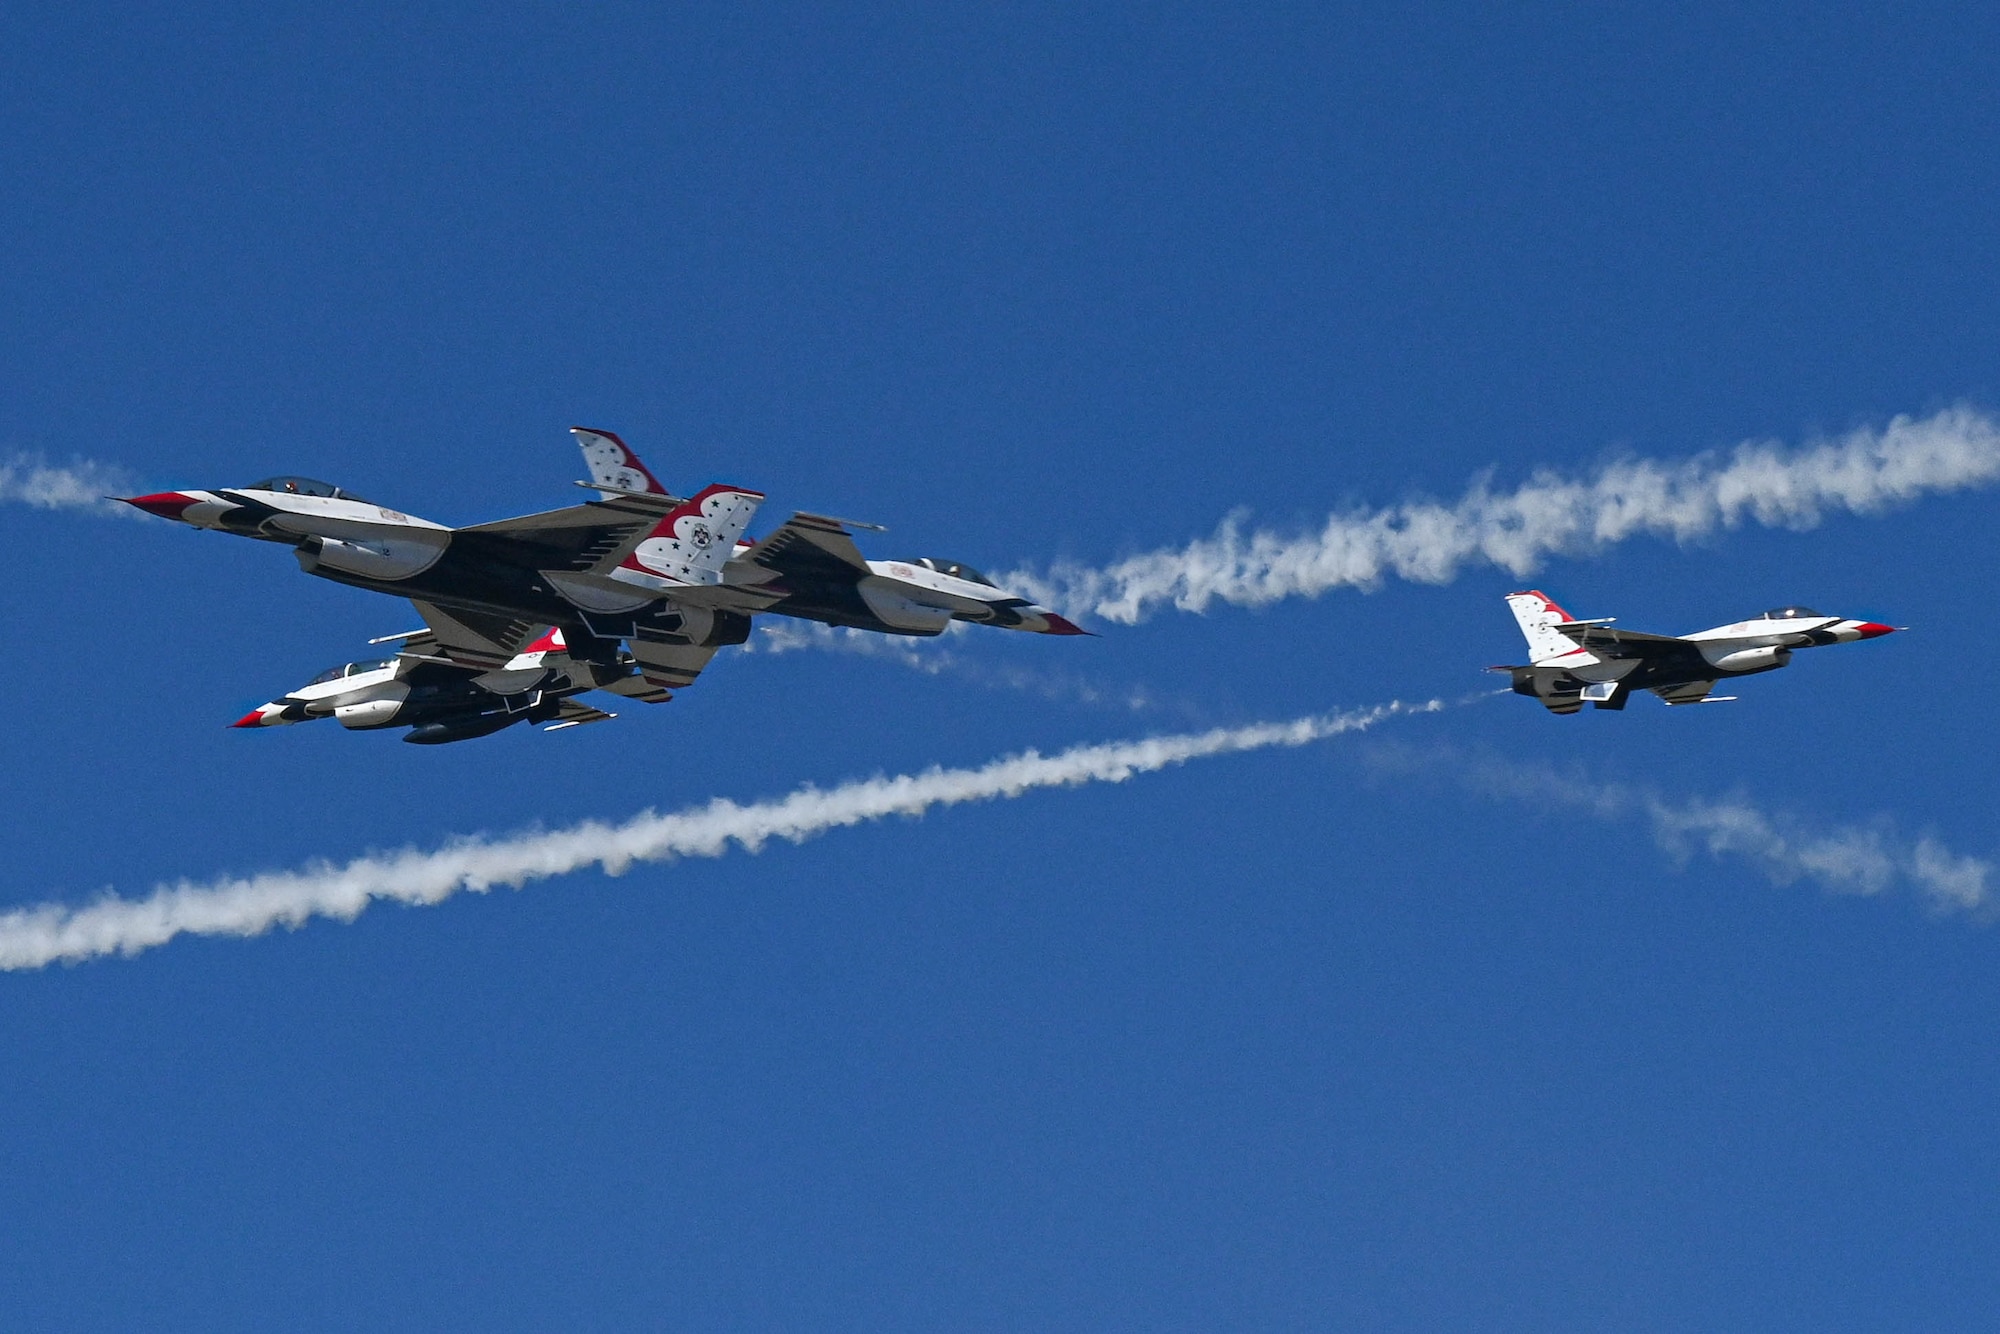 Two F-16's flying